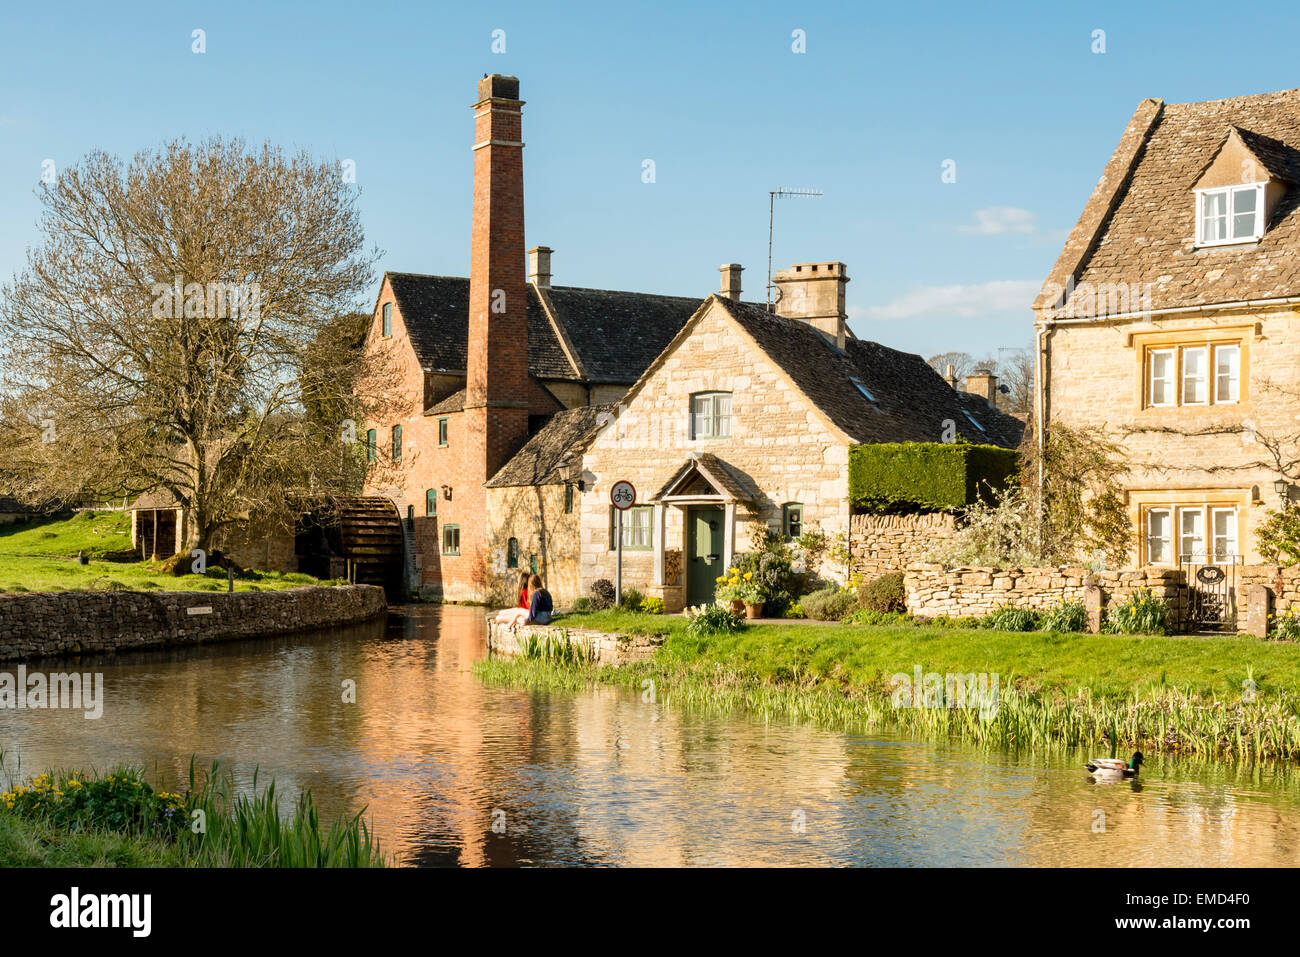 Watermill at Lower Slaughter, Cotswolds, UK. Stock Photo